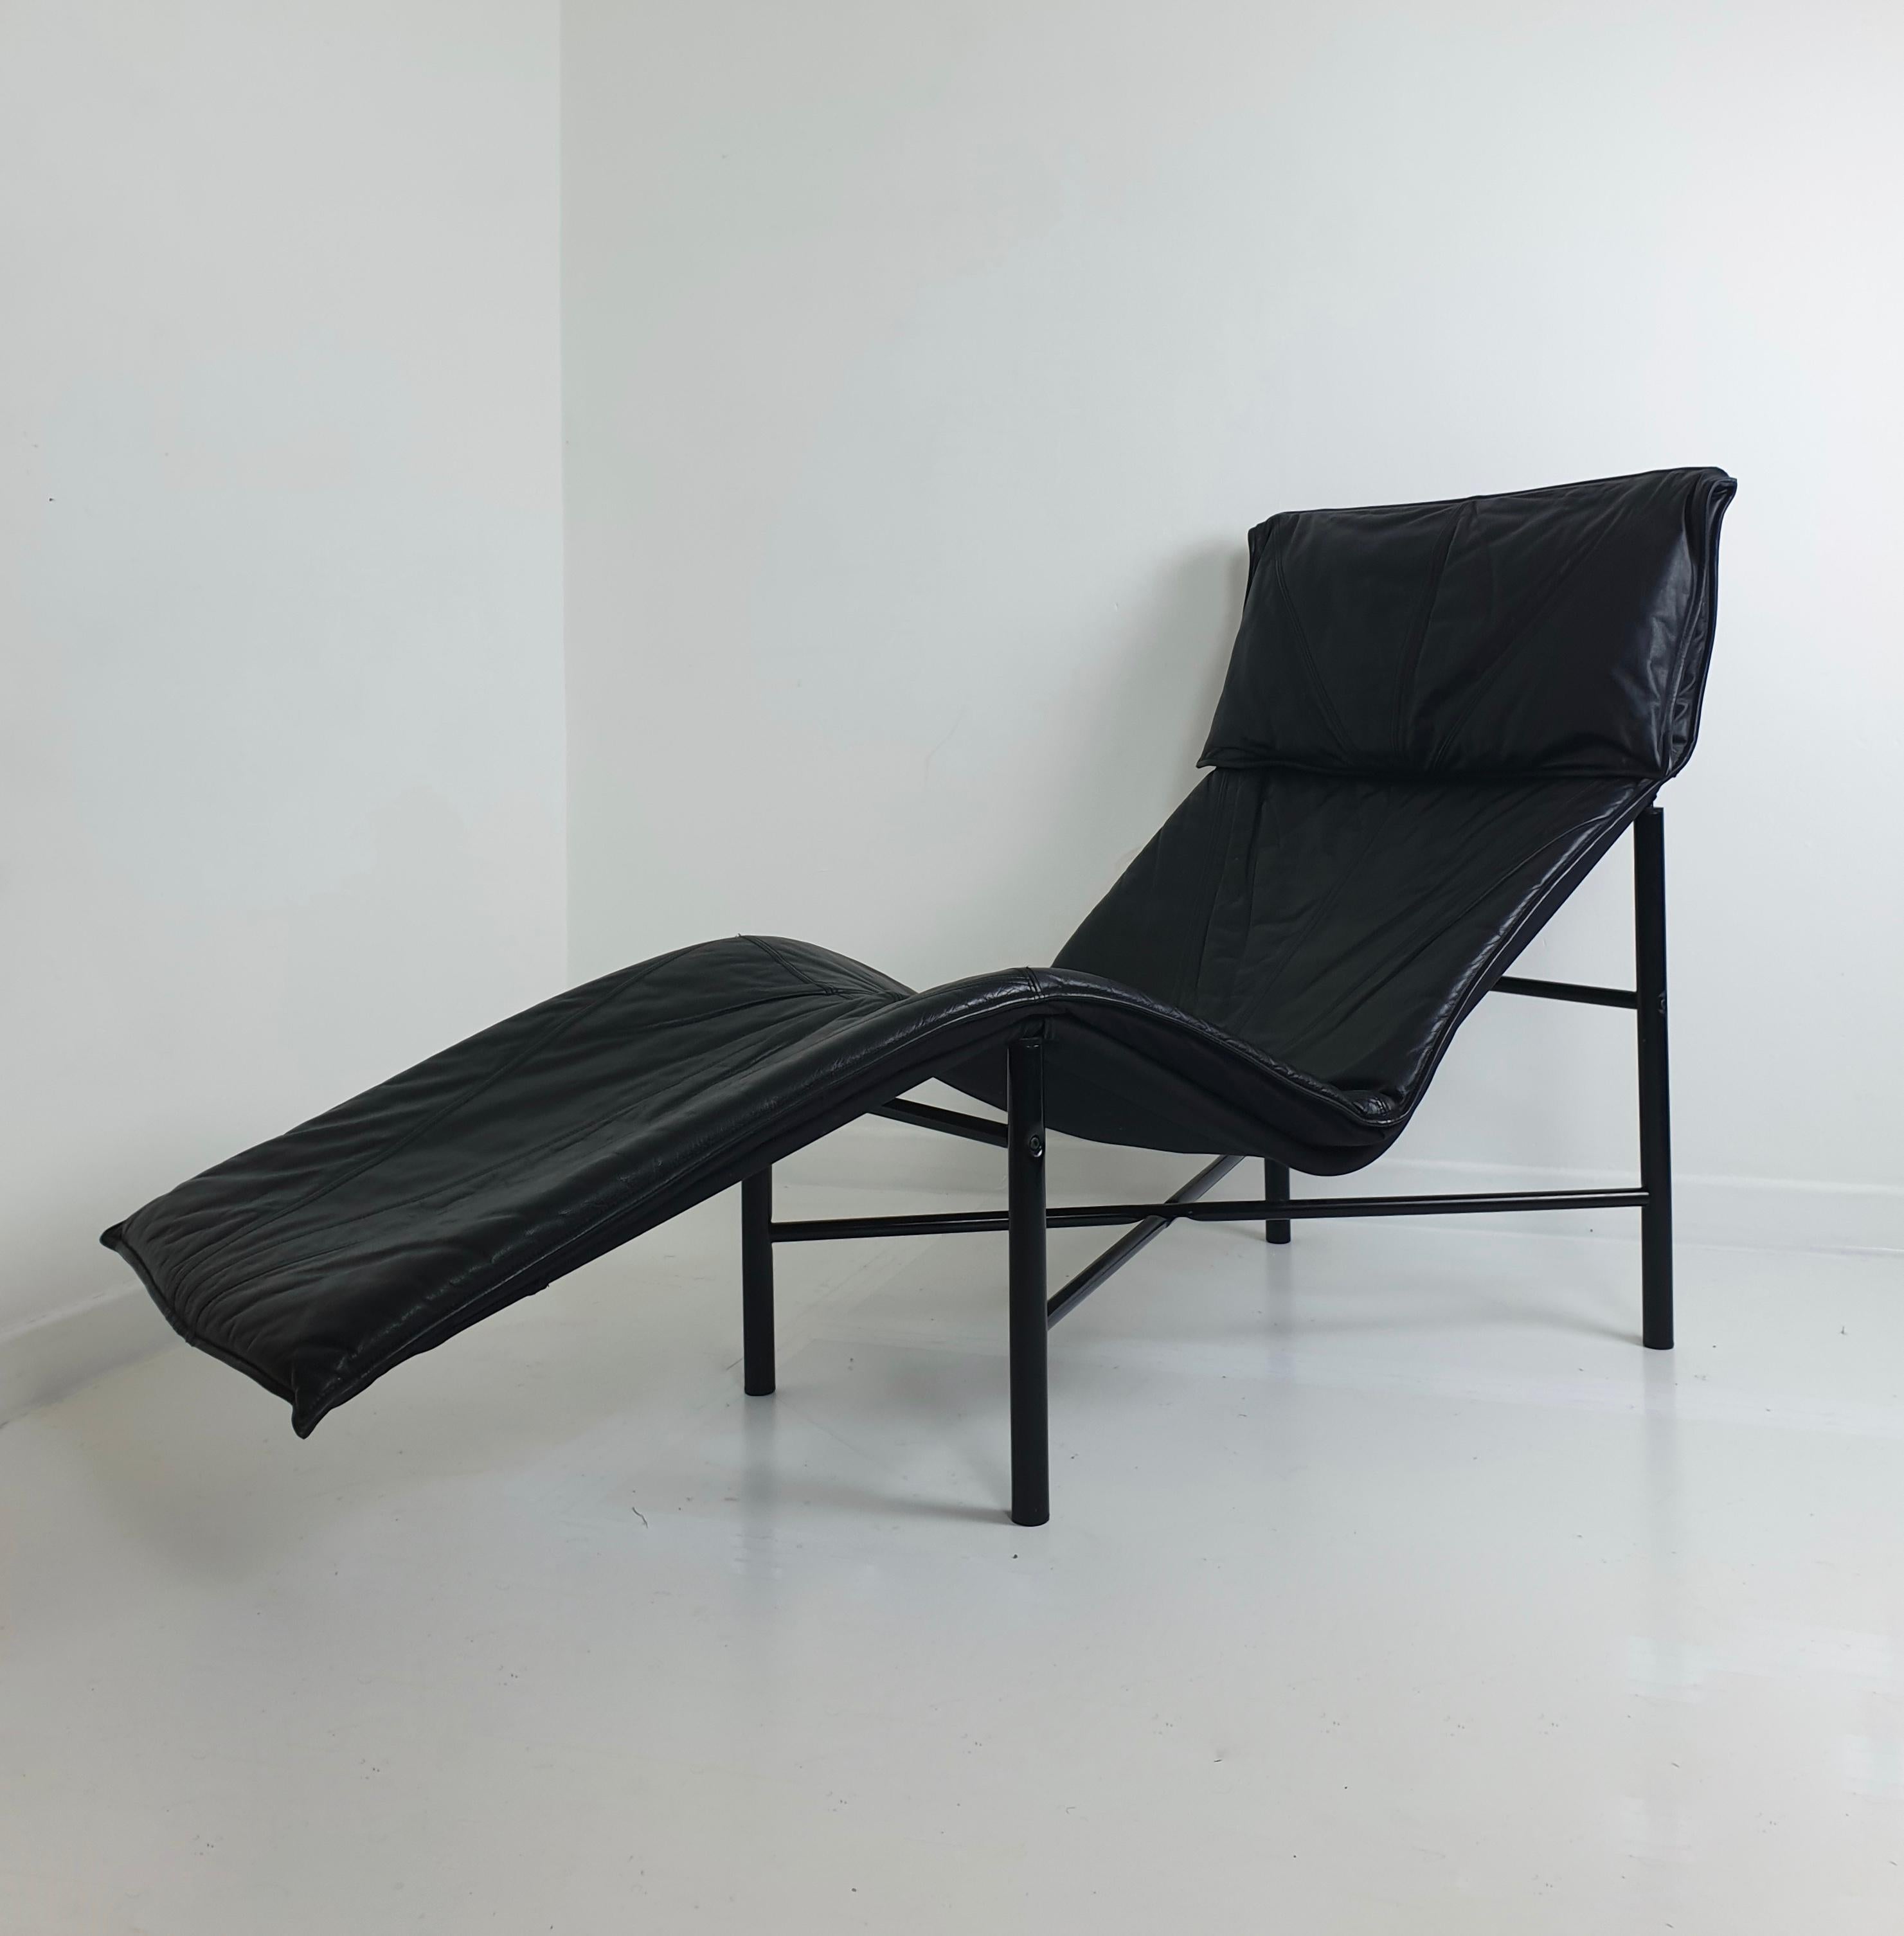 Late 20th Century Black Leather 'Skye' Chaise by Tord Björklund for Ikea, circa 1980 For Sale